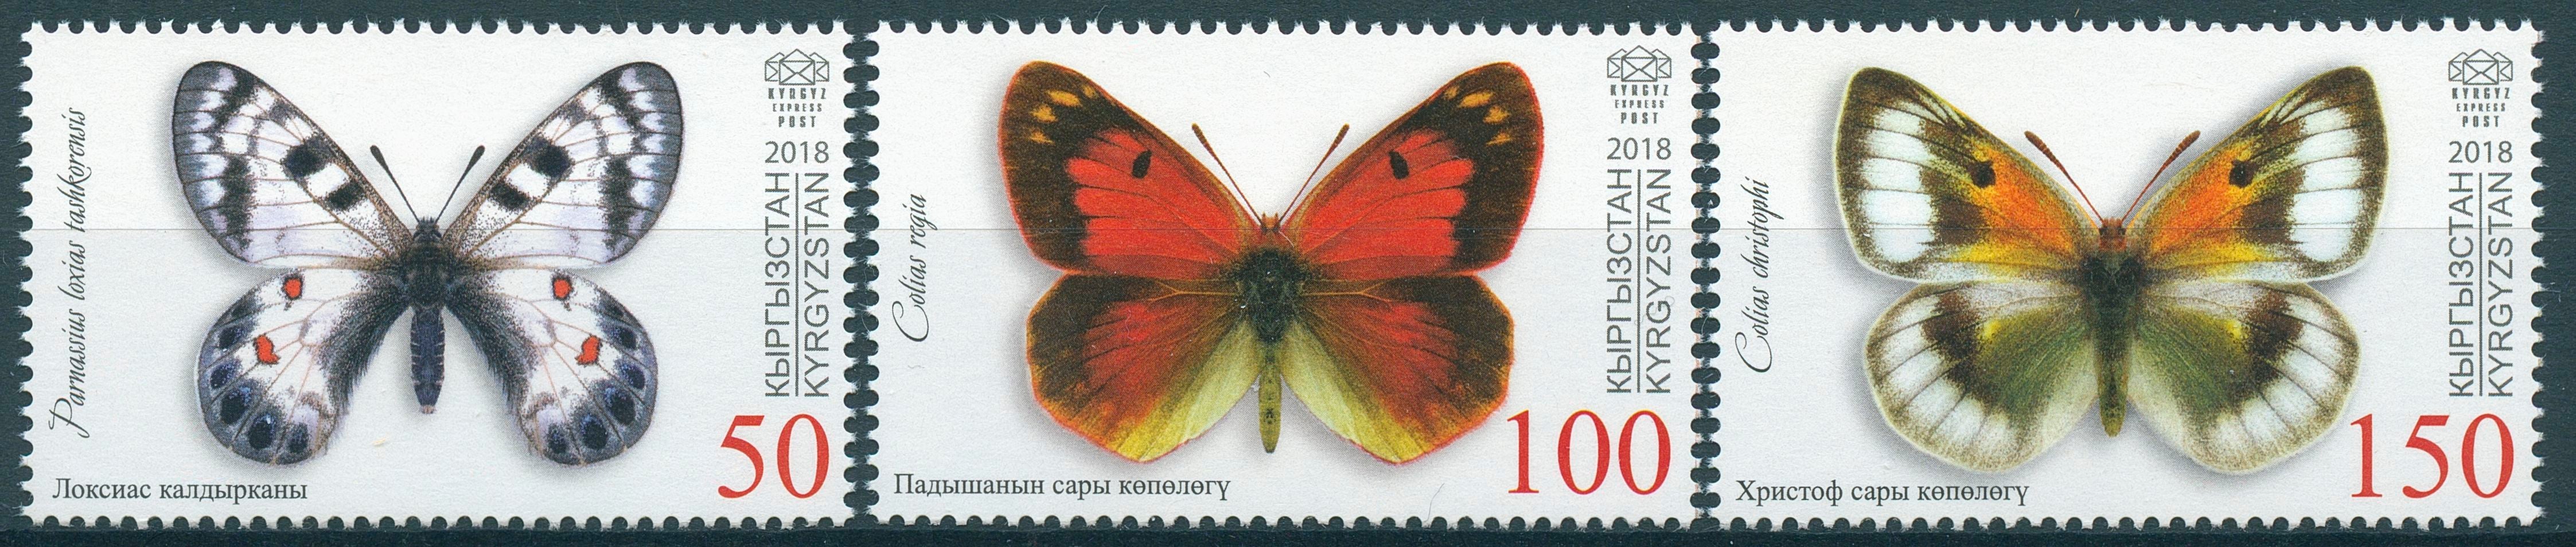 Kyrgyzstan KEP 2018 MNH Butterflies 3v Set Butterfly Insects Stamps